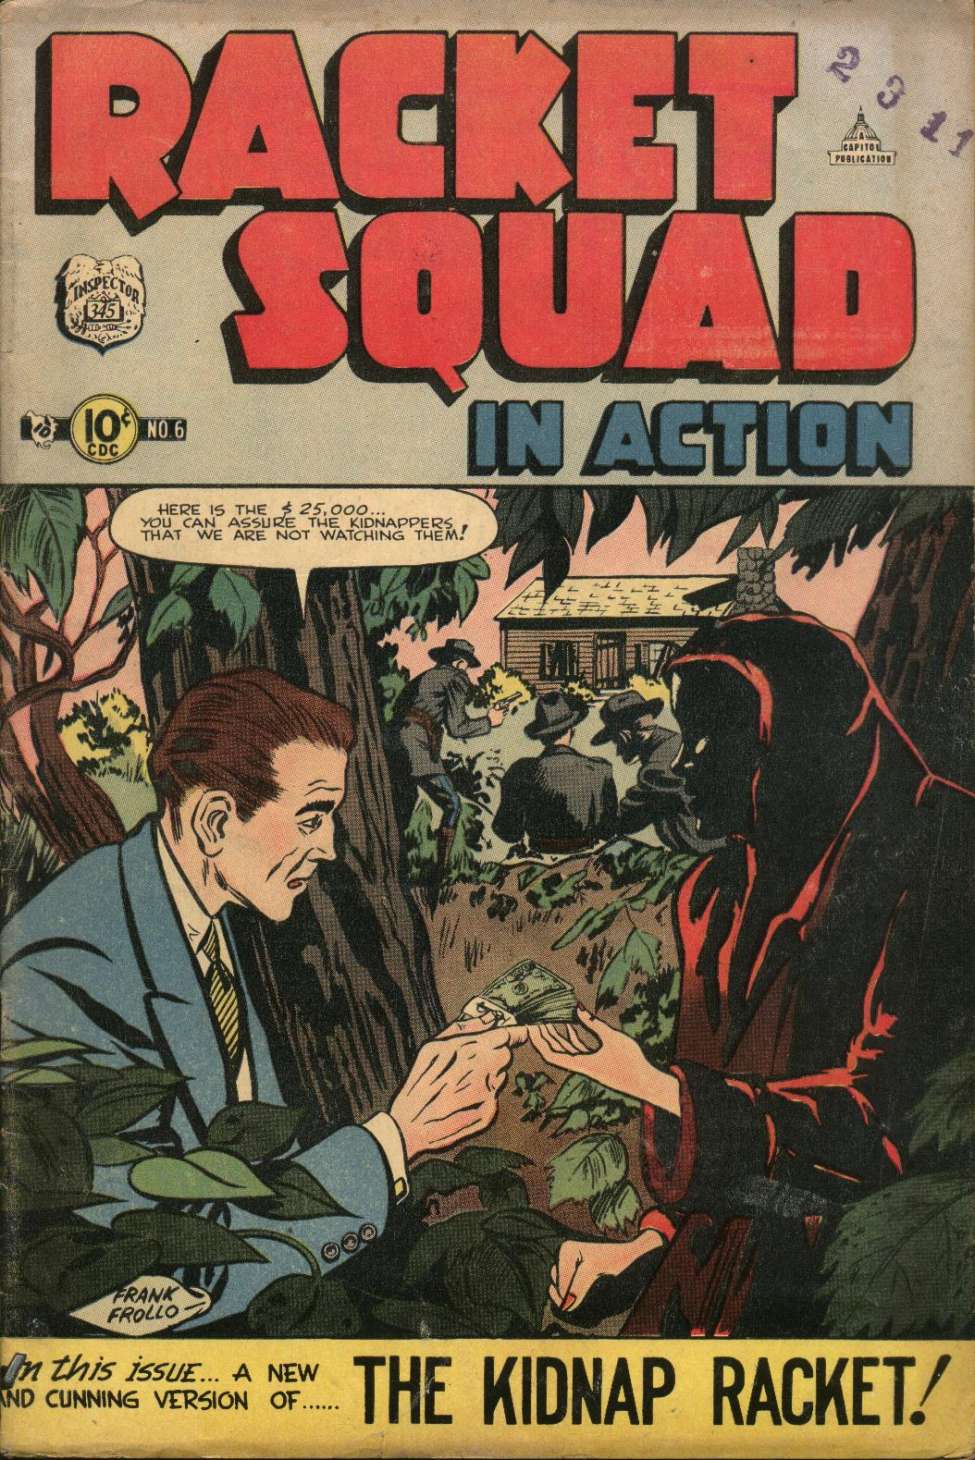 Comic Book Cover For Racket Squad in Action 6